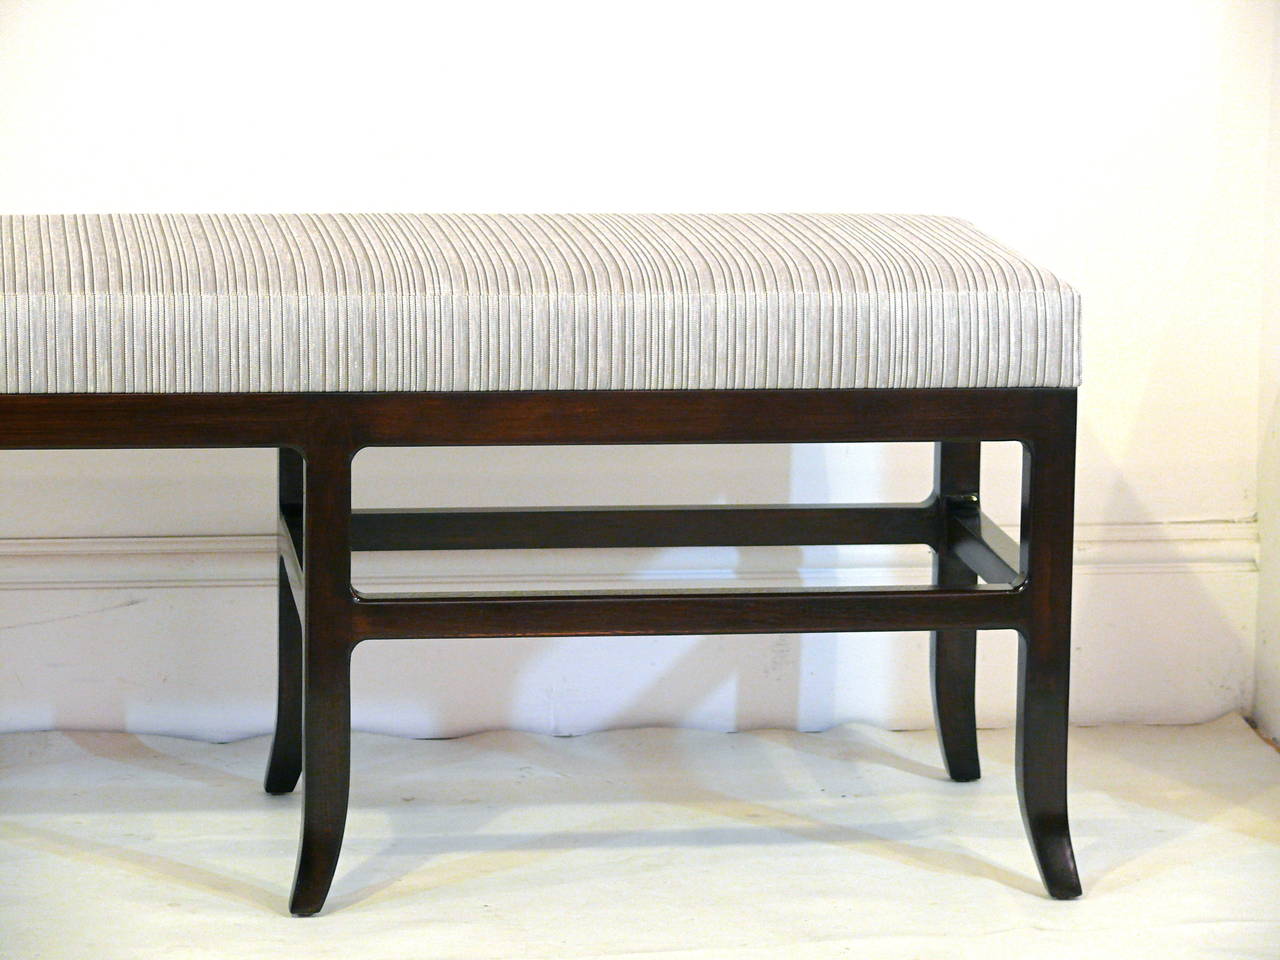 Double Pedestal Splayed Leg Bench in the Manner of James Mont 1